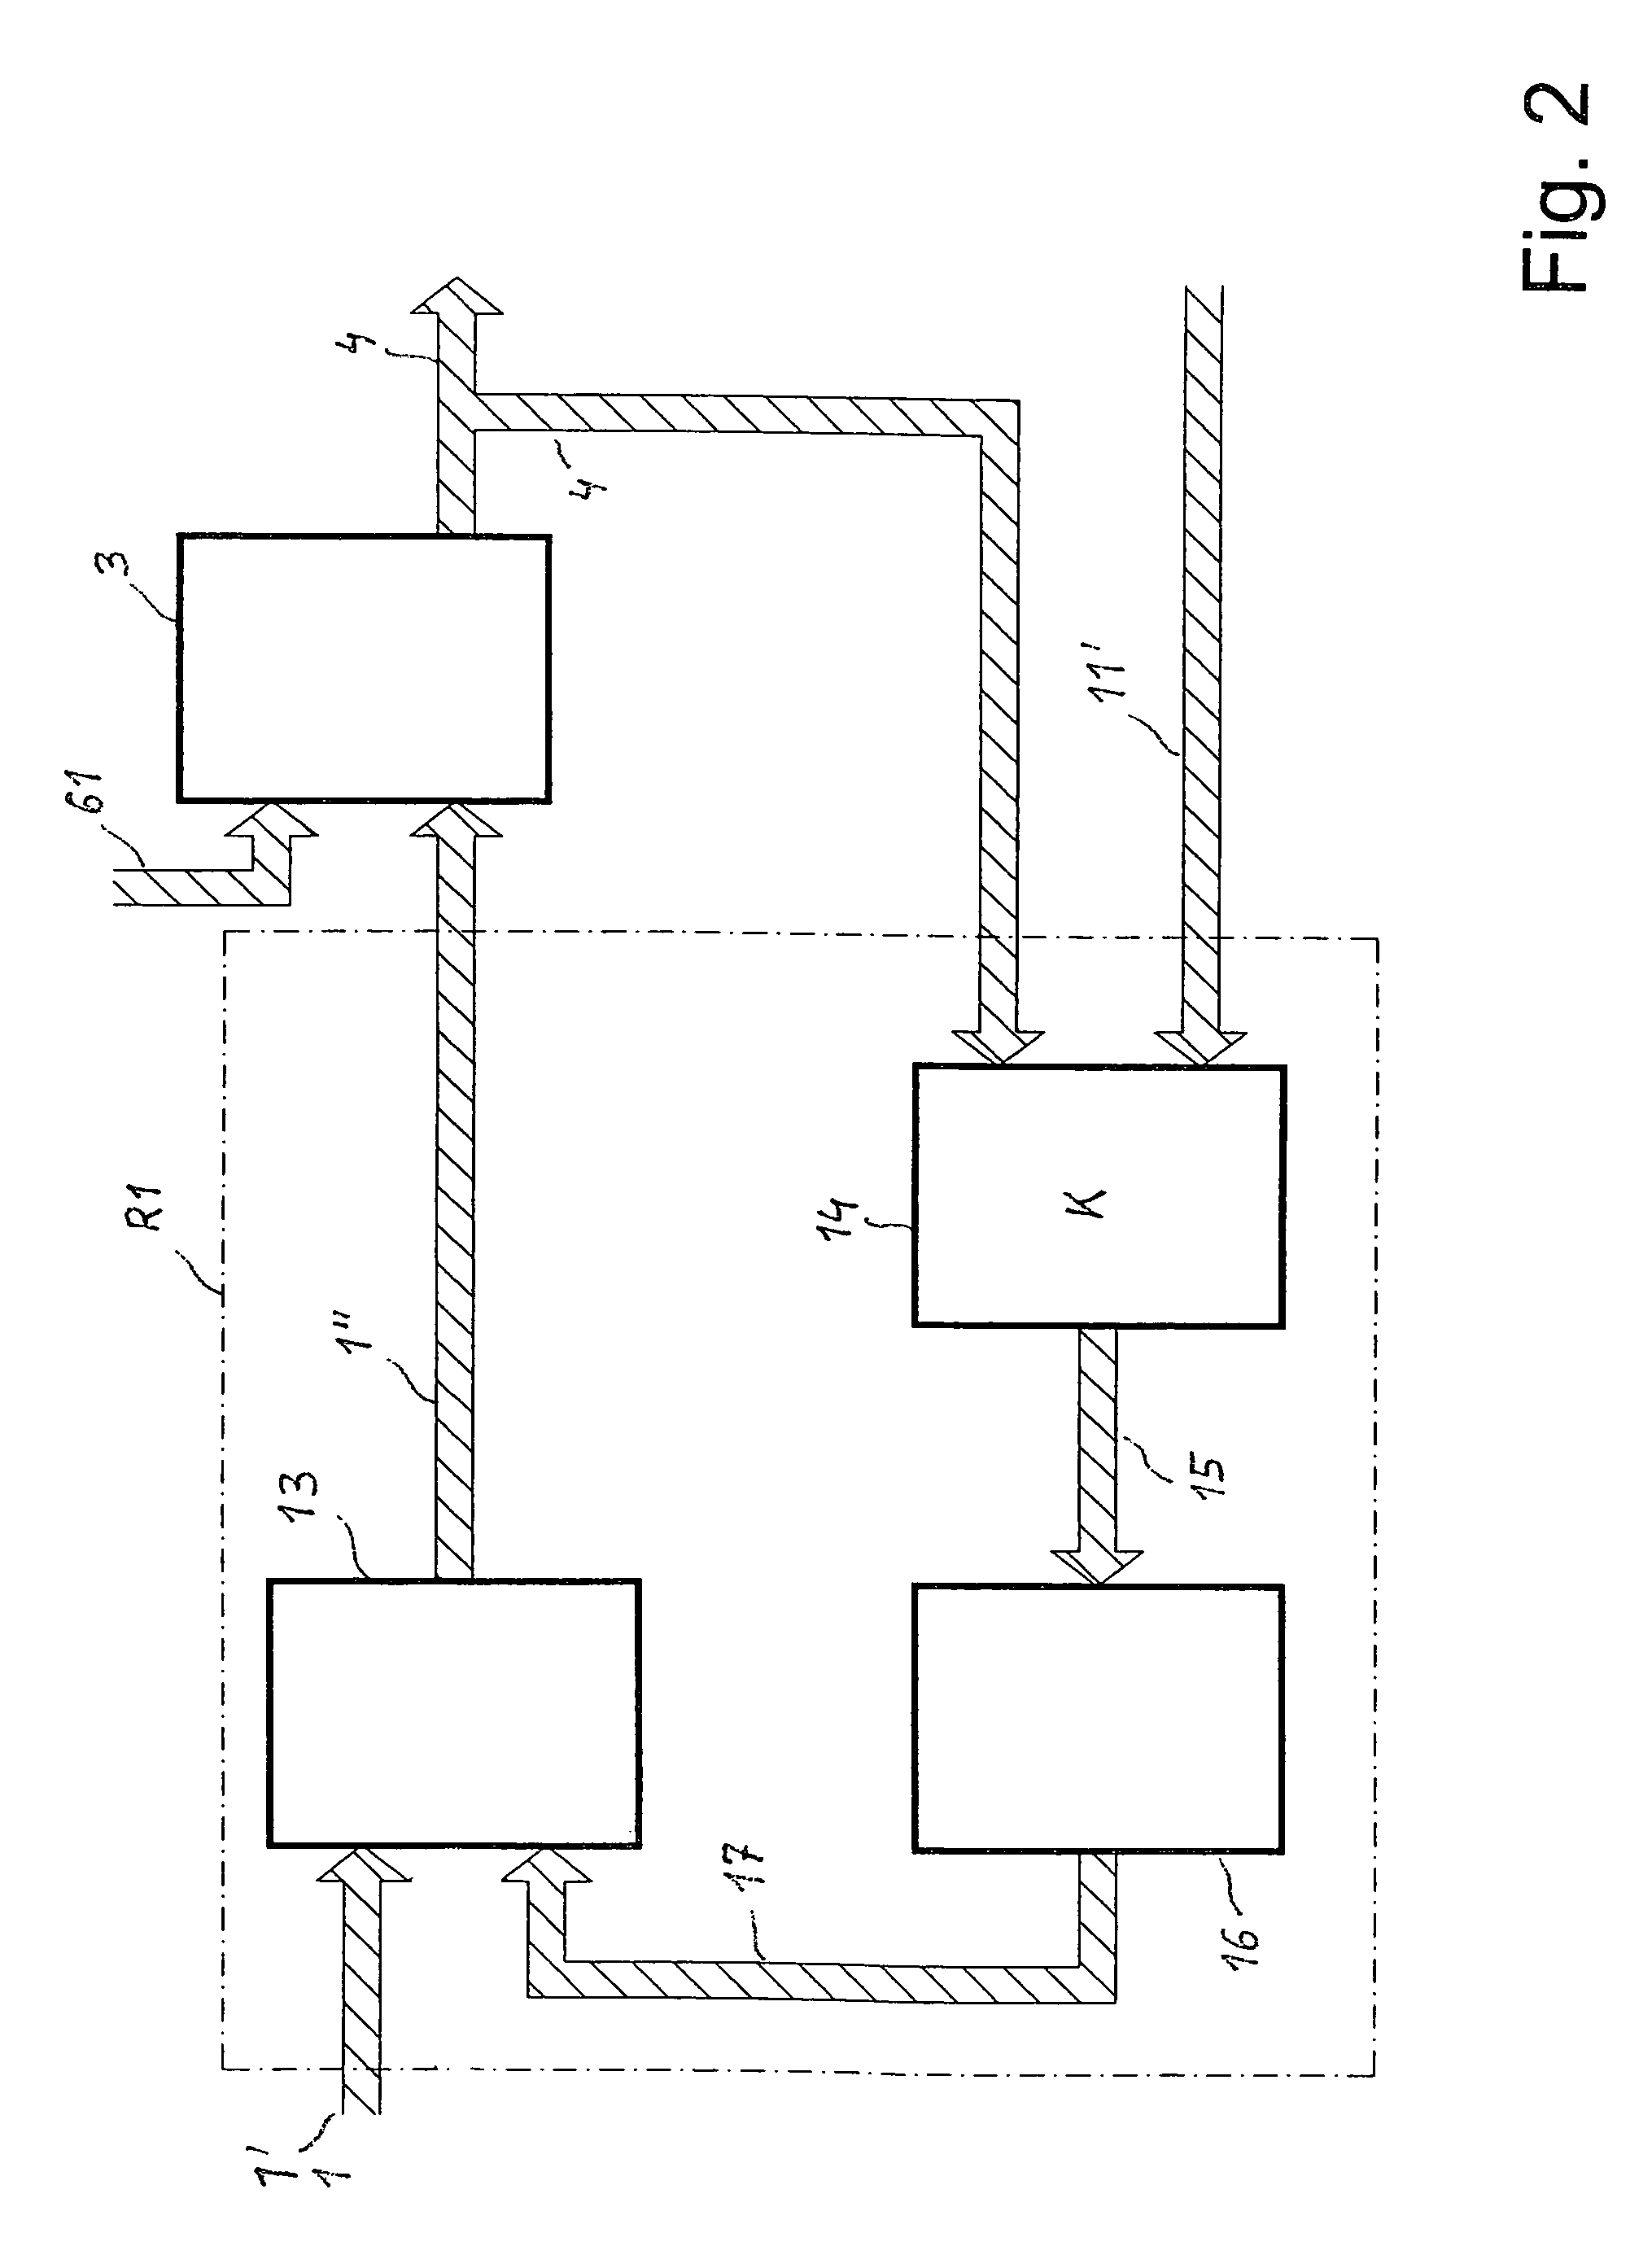 Method for generating a high-power alternating voltage that follows an input data system